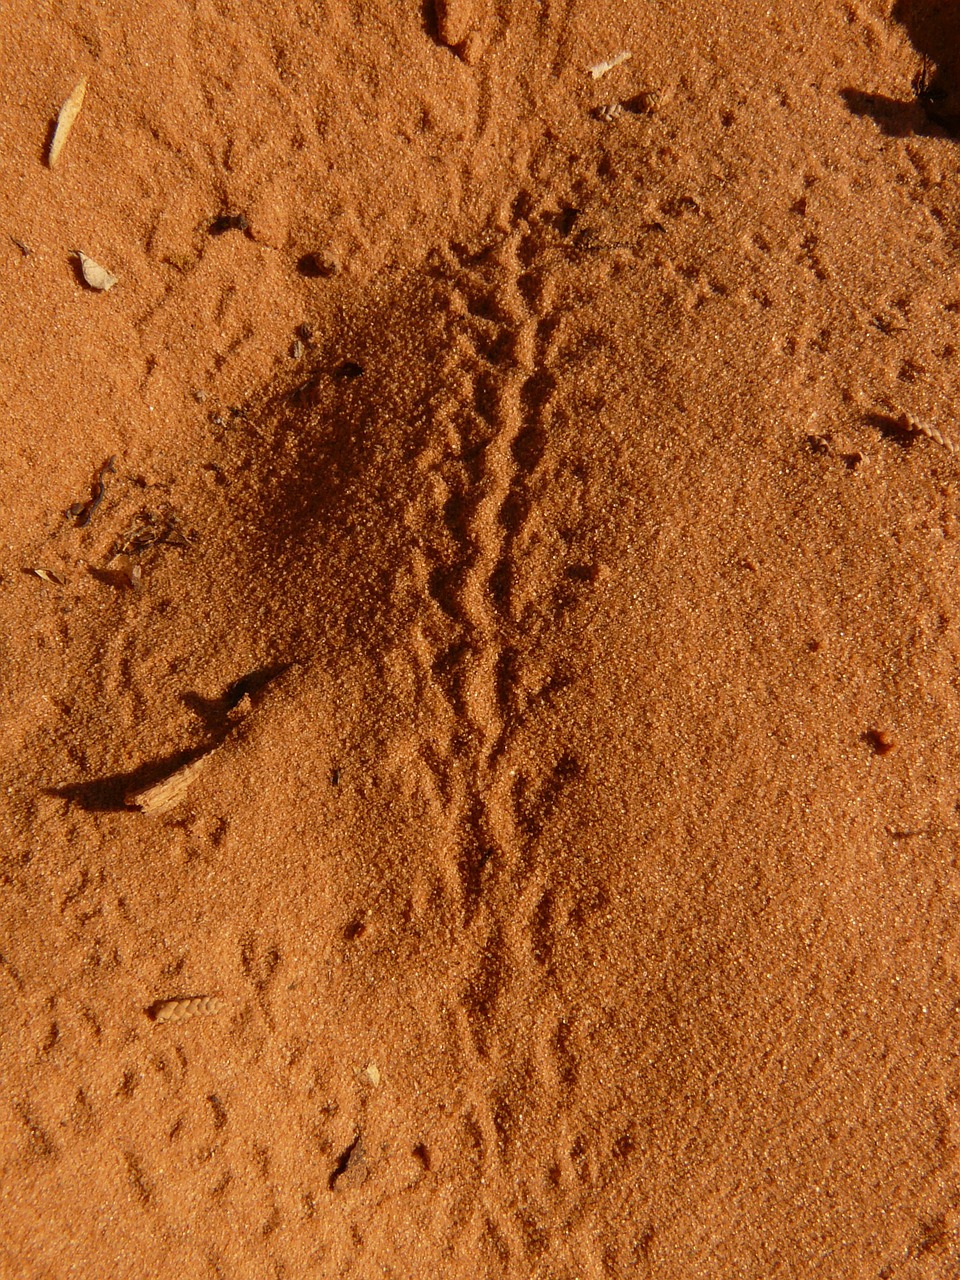 trace reprint snake track free photo